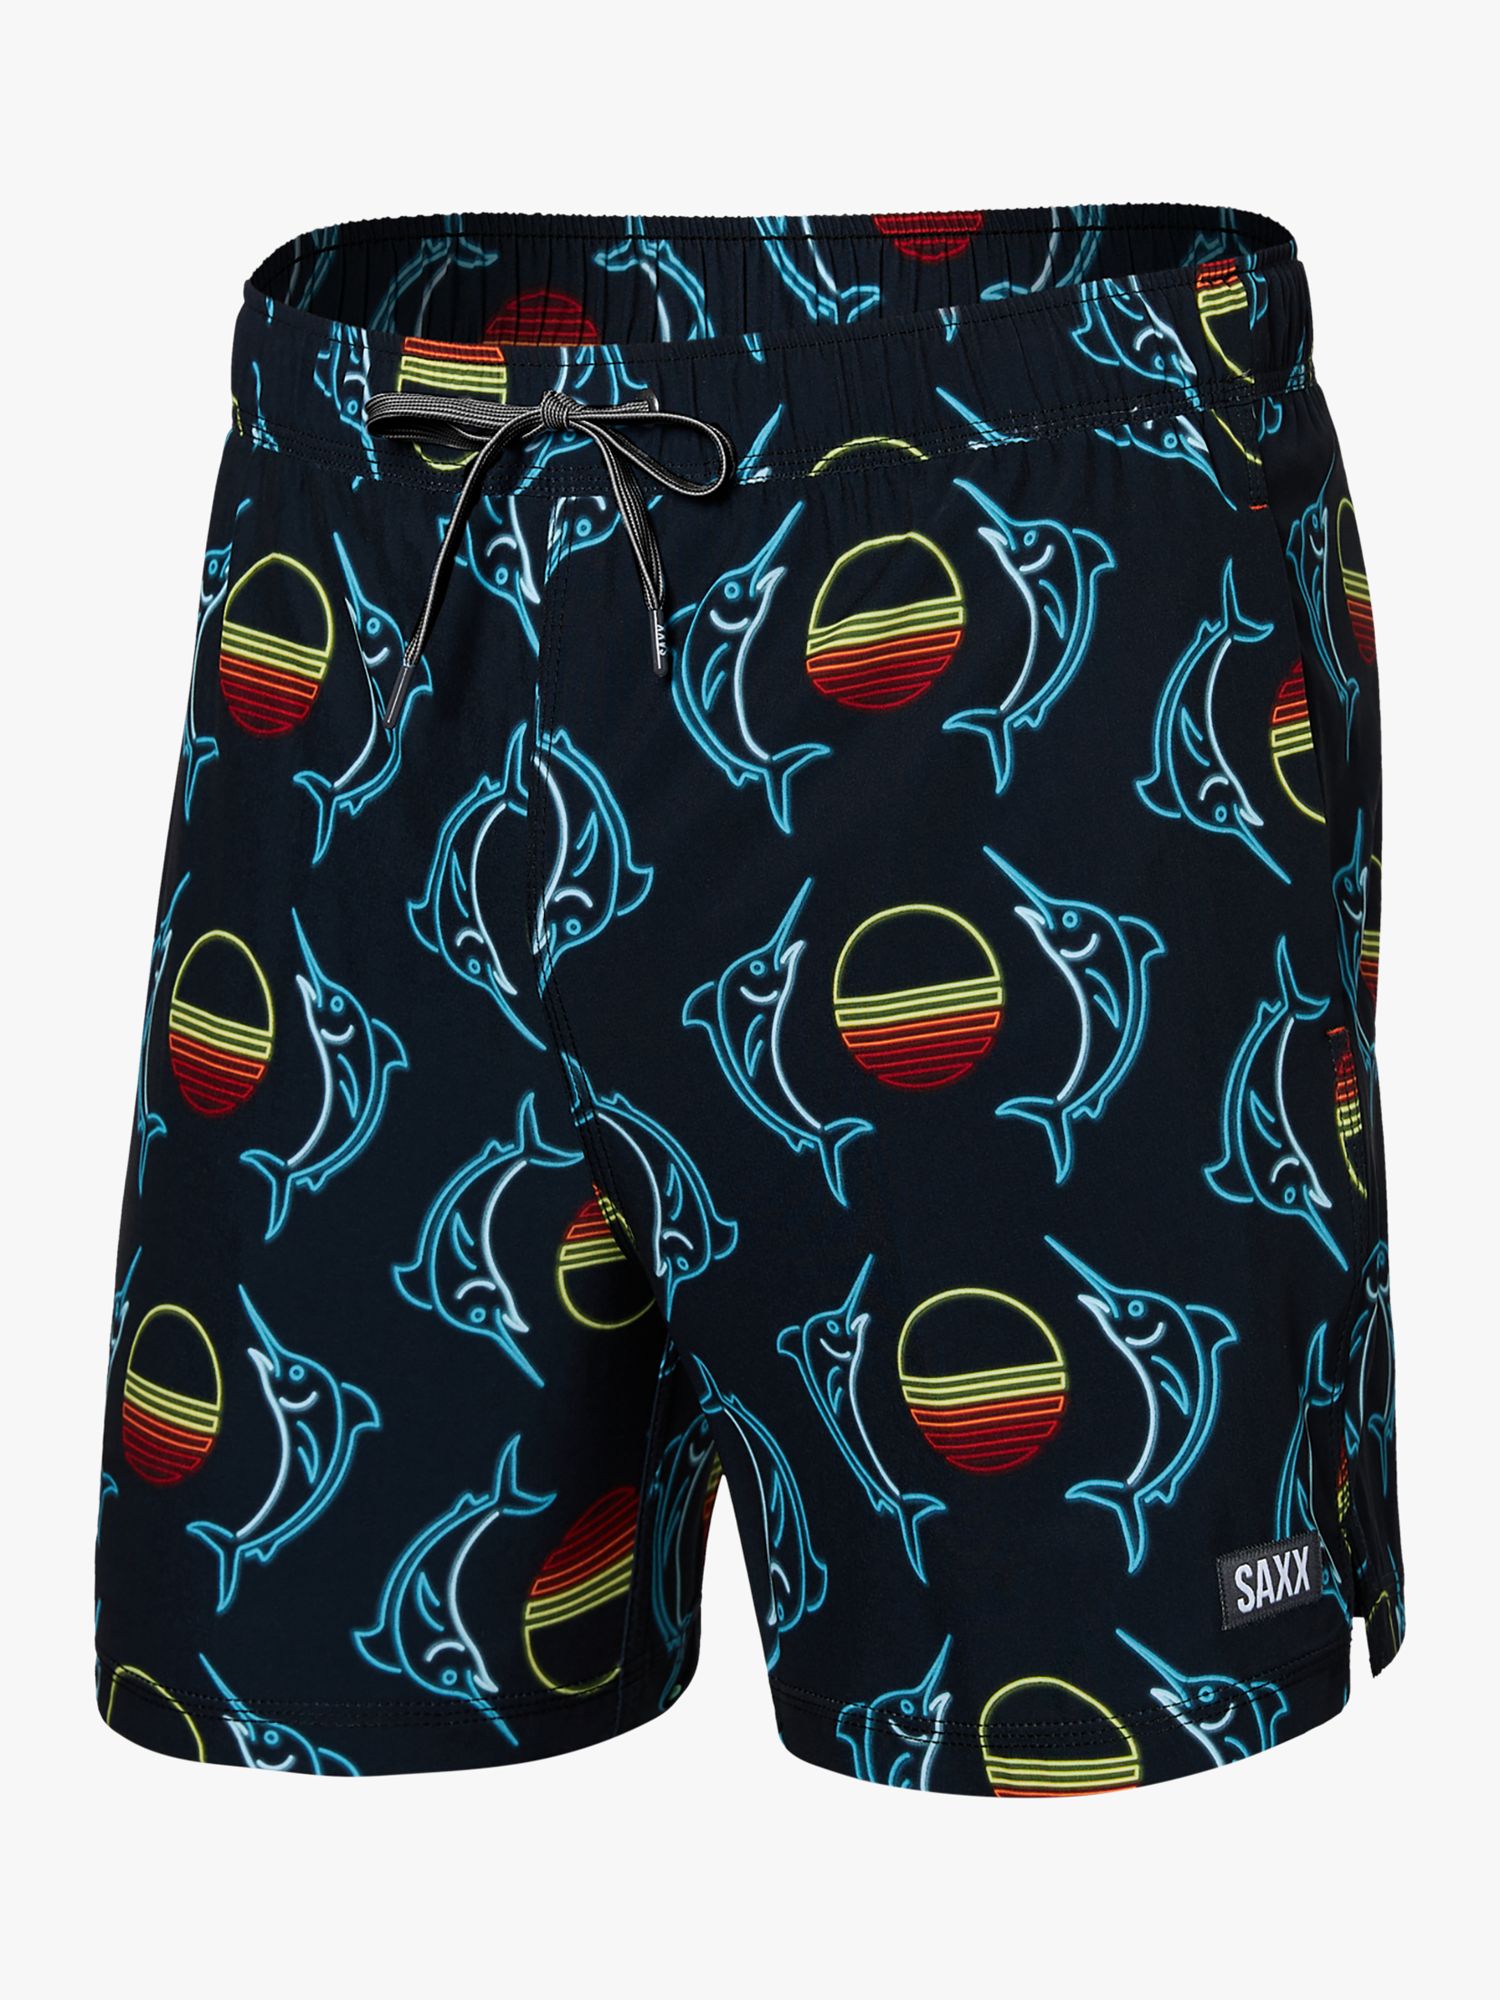 Buy SAXX Oh Buoy 2-in-1 Swim Shorts, Multi Online at johnlewis.com